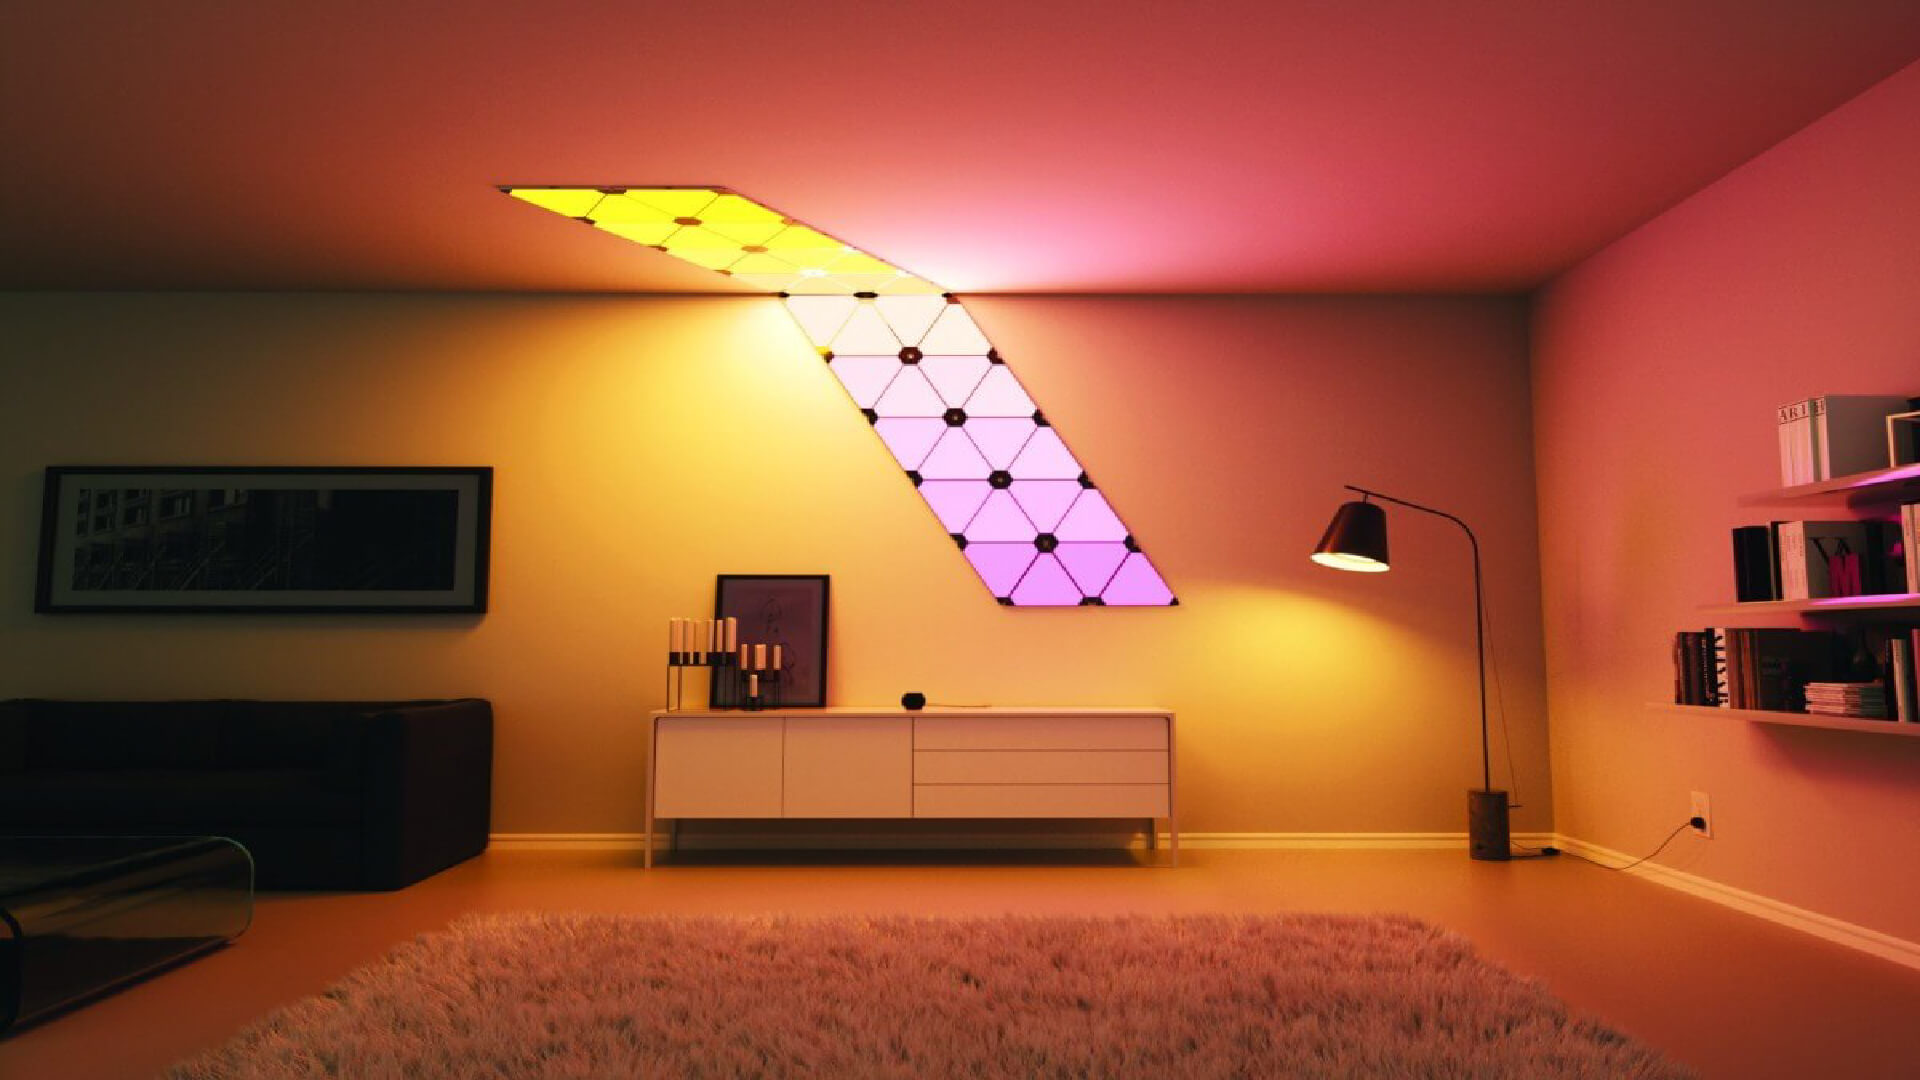 lighting products with a playful design DesignWanted : DesignWanted